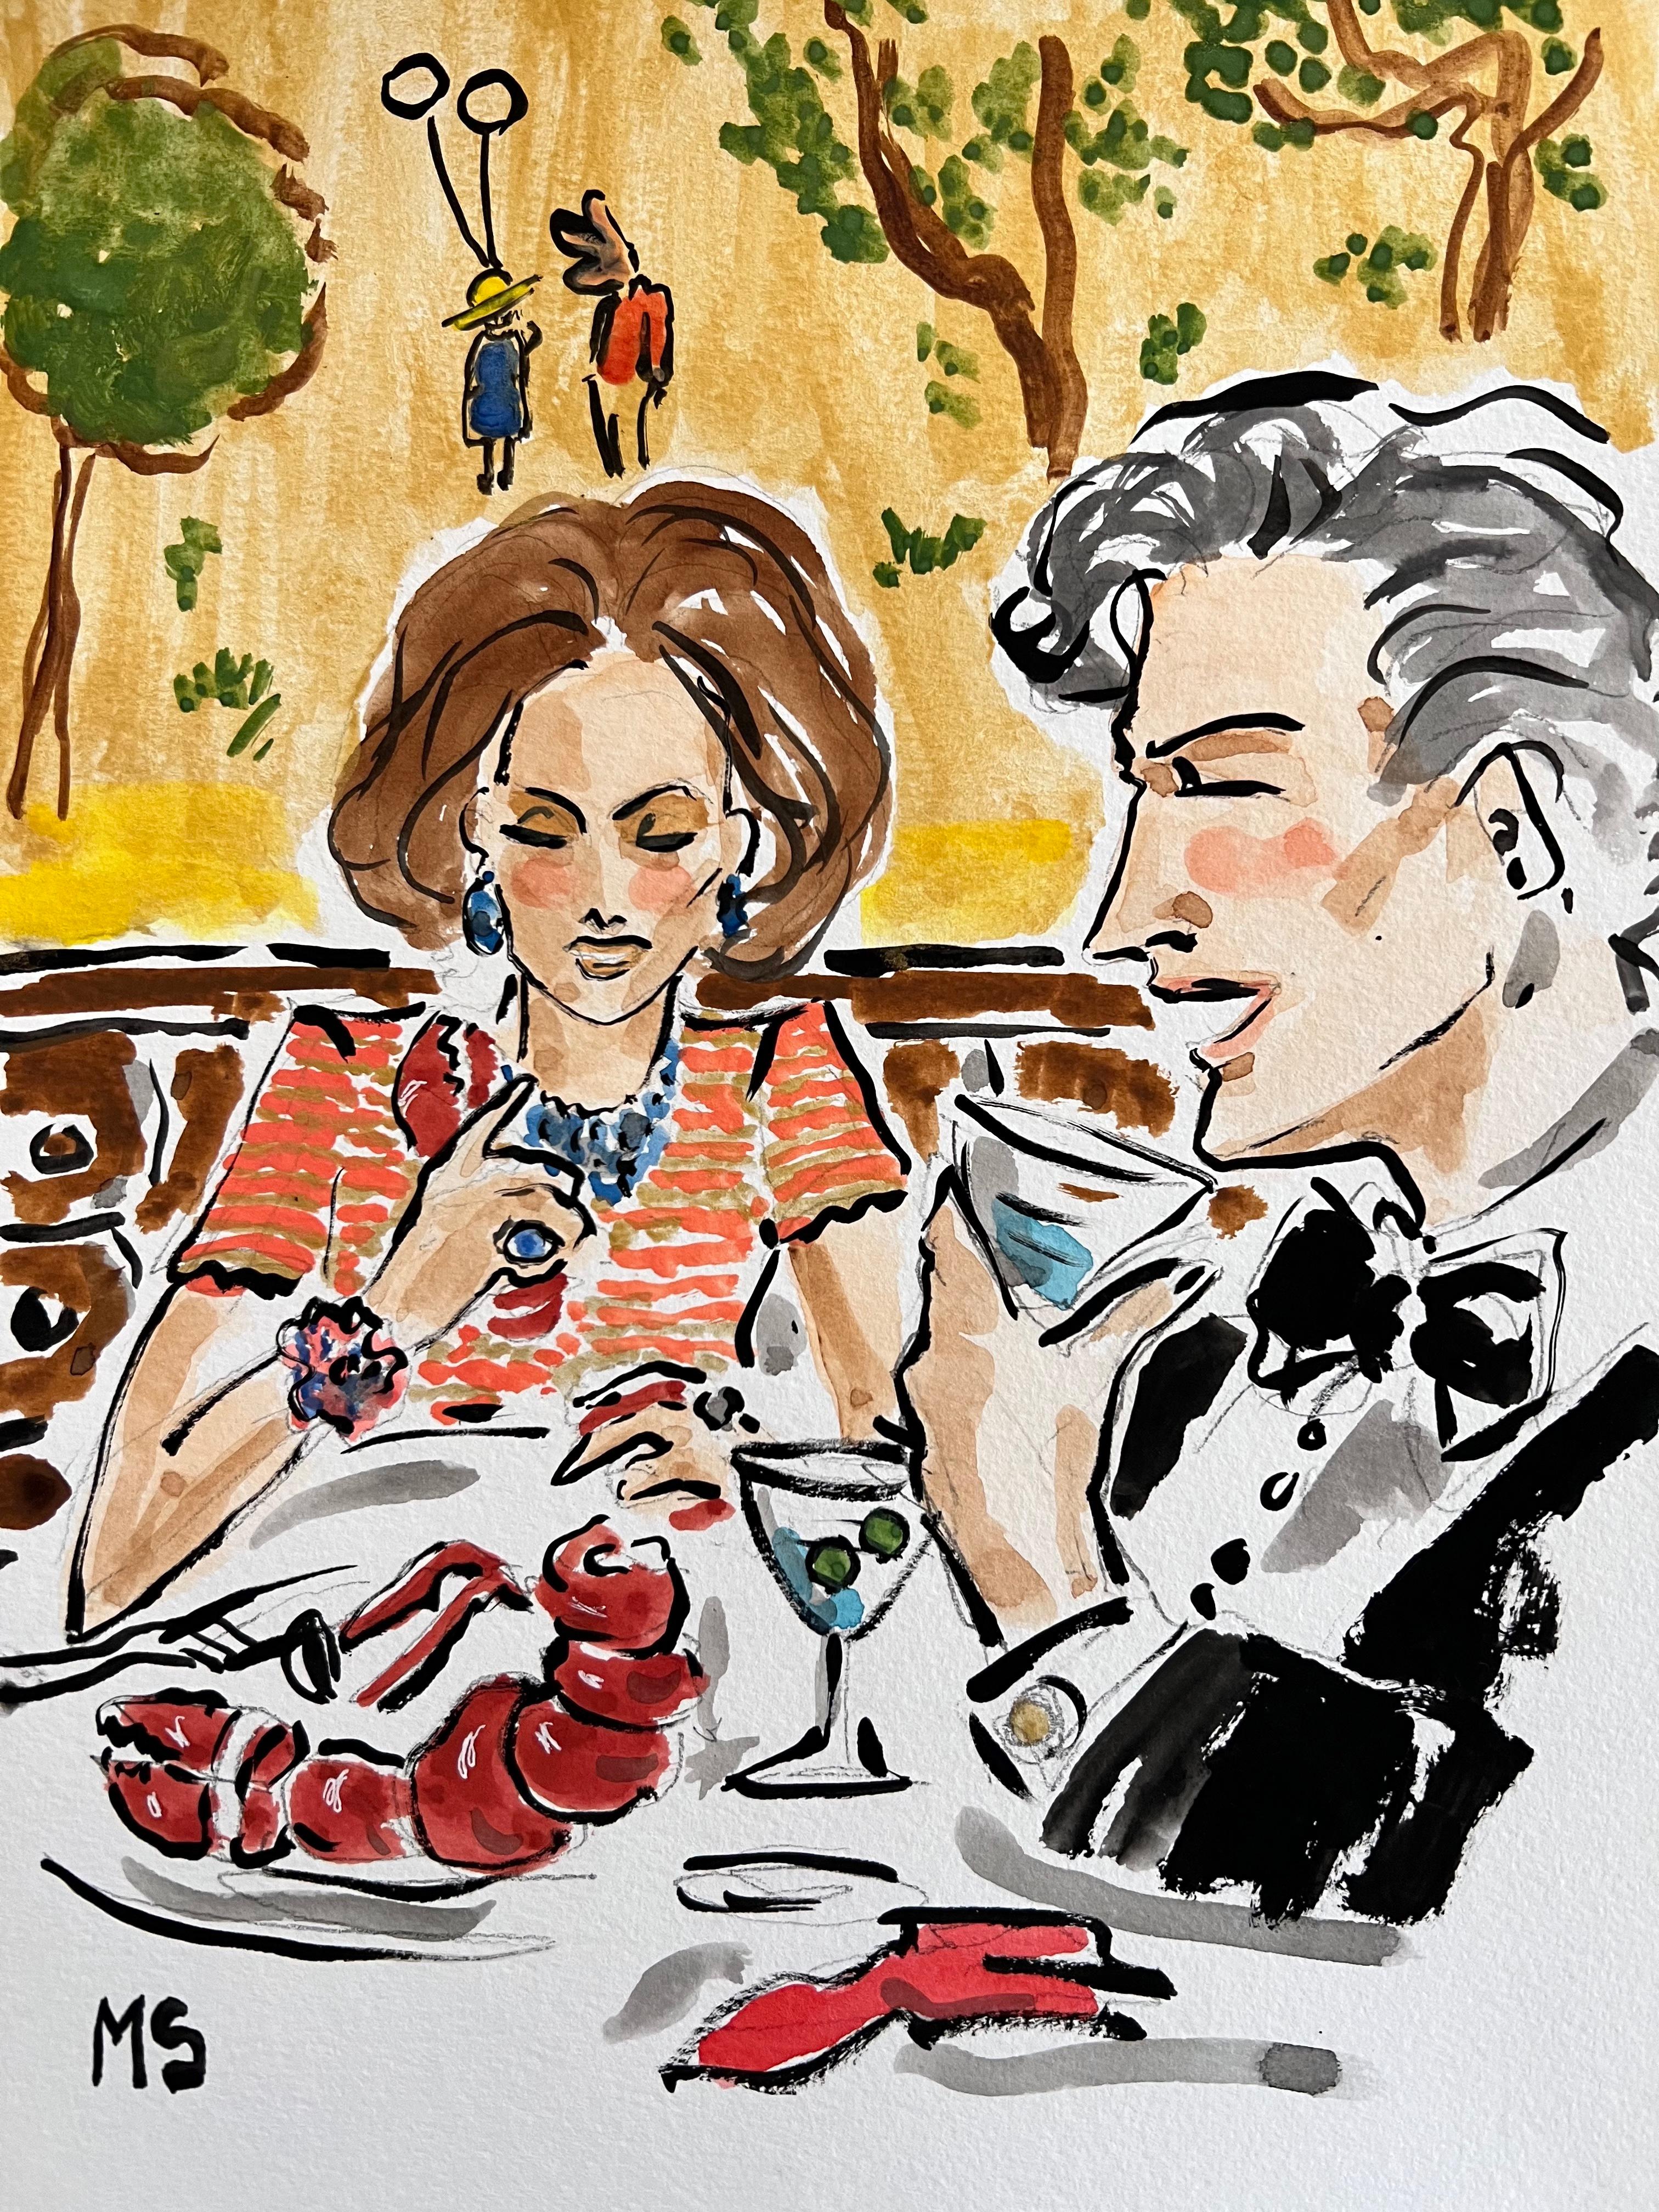 Manuel Santelices Figurative Art - Lobster dinner at the Carlyle, Watercolor social scene New York City